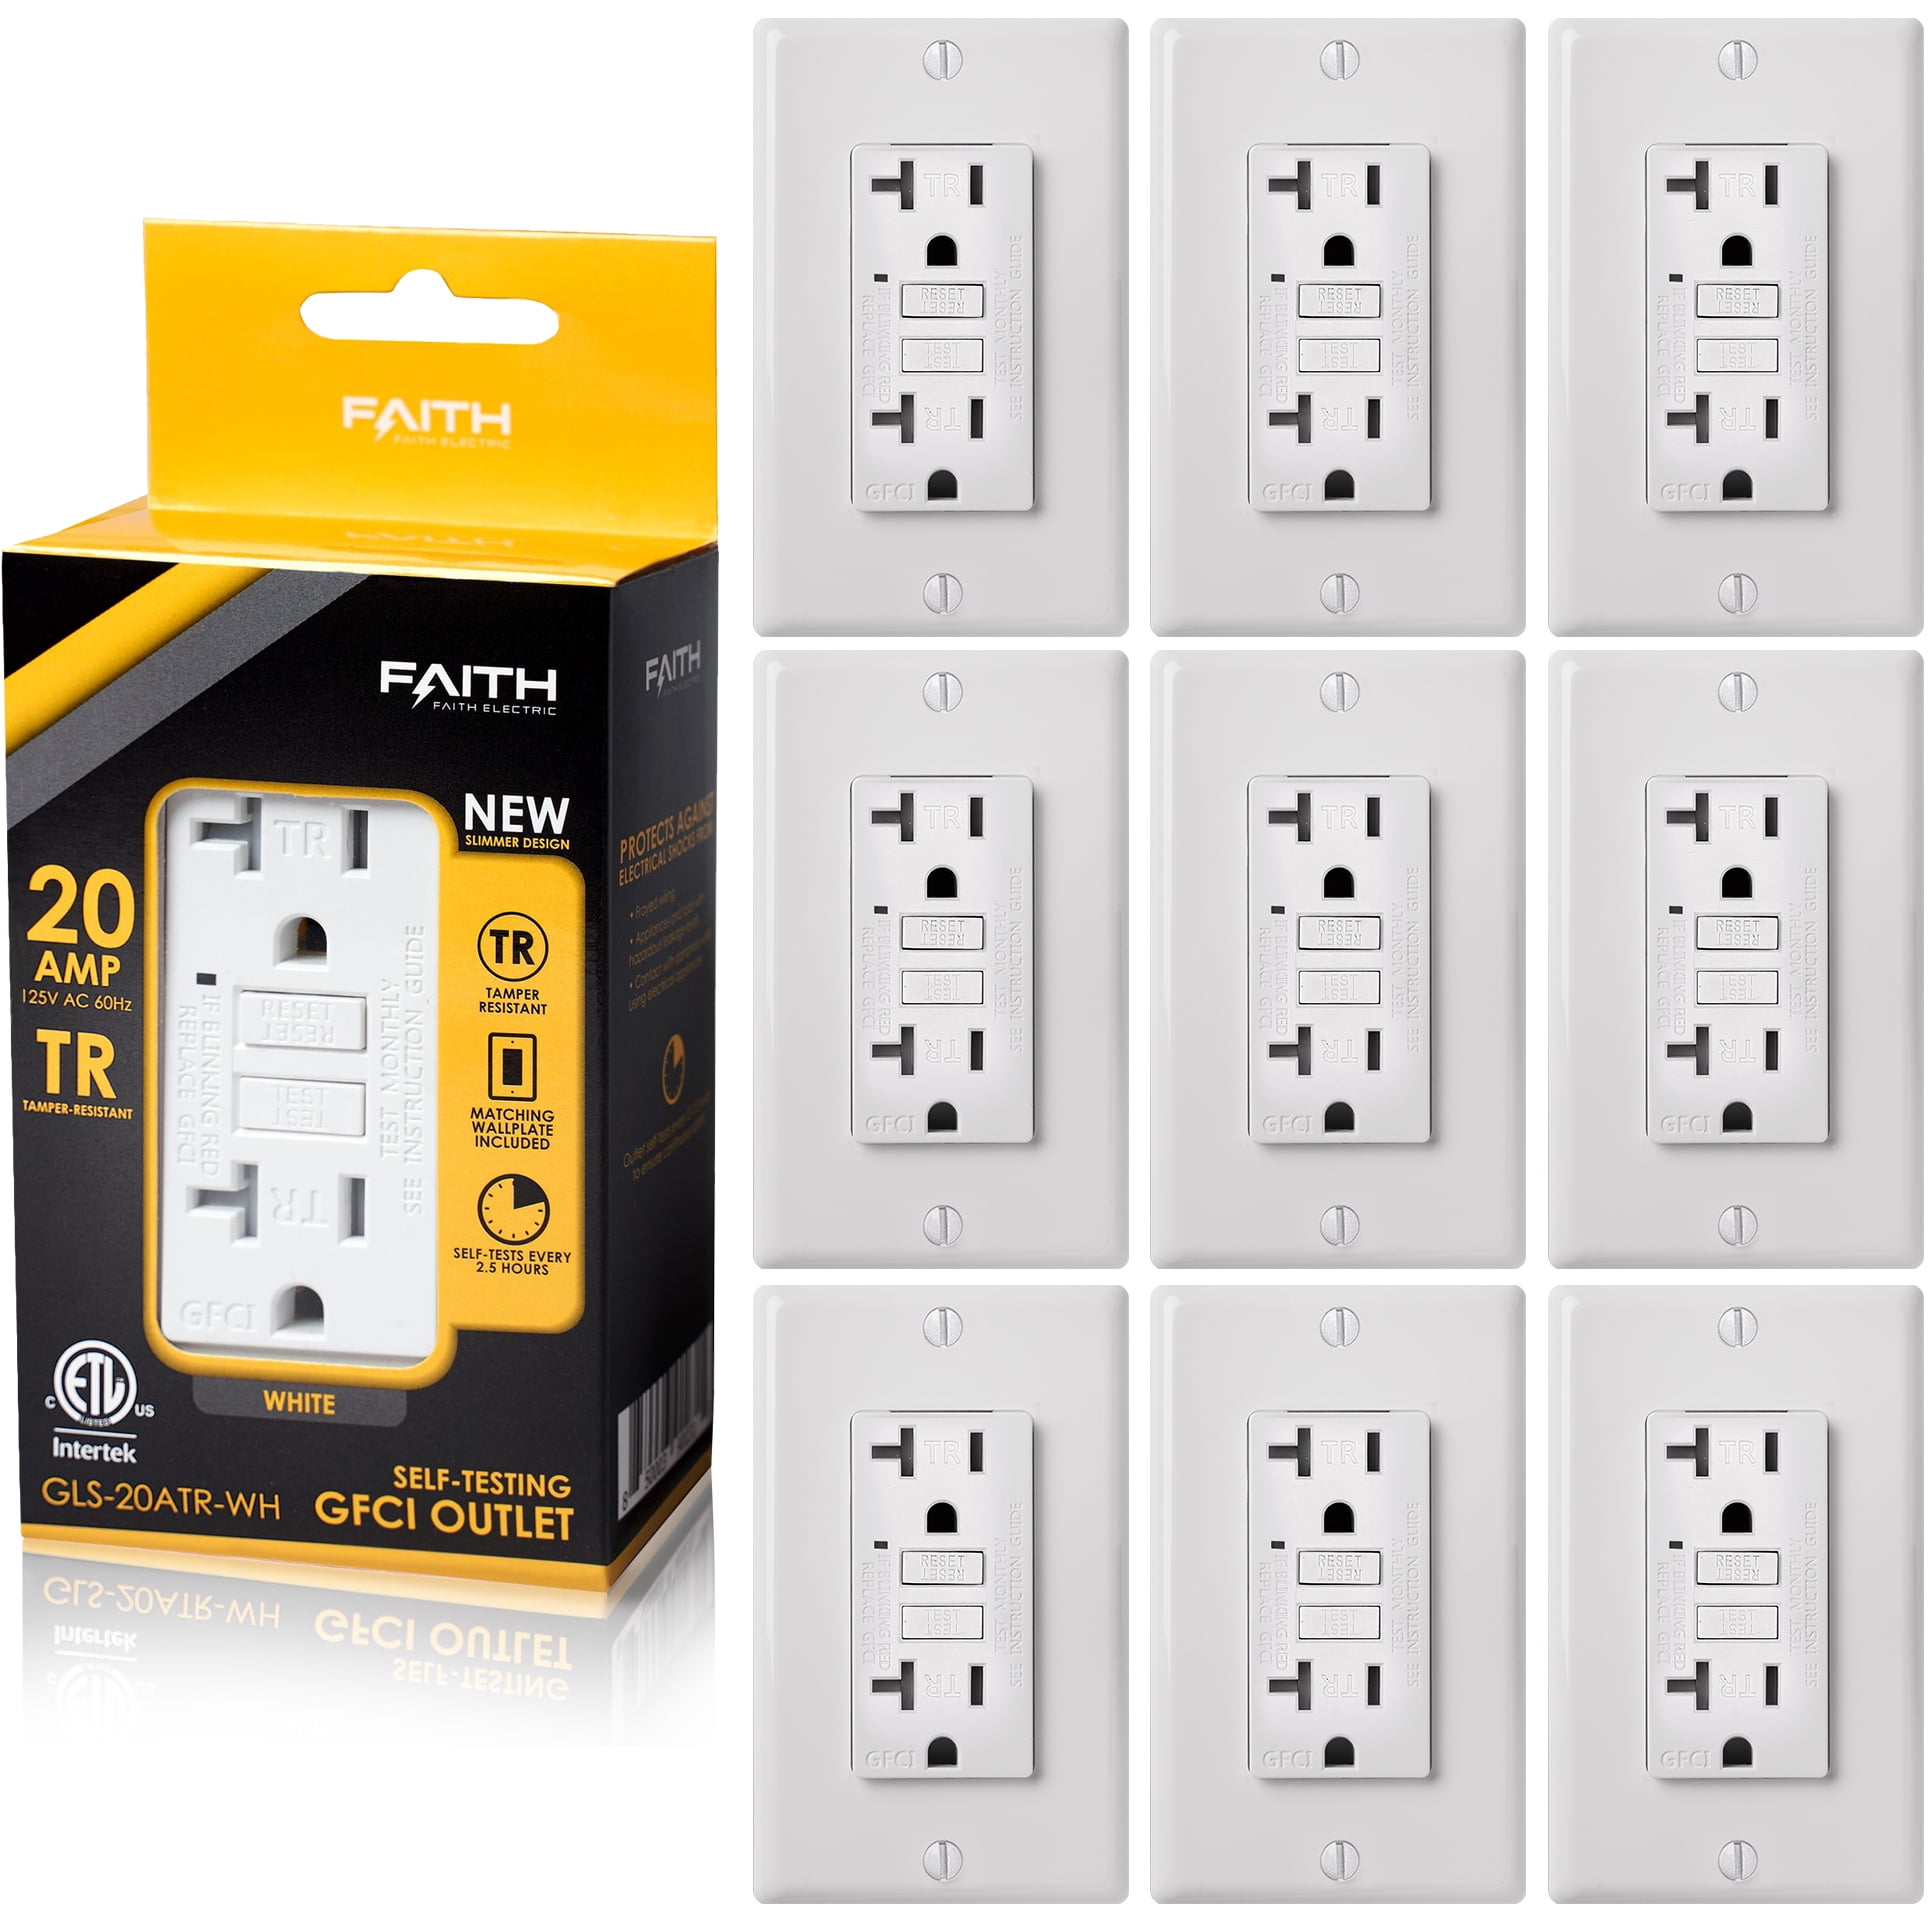 White USG5 GFI Duplex Receptacle with LED Indicator TR 6 Pack Self-Test Ground Fault Circuit Interrupter with Decorator Wall Plate Tamper-Resistant UL Listed BESTTEN Slim GFCI Outlet 15A 